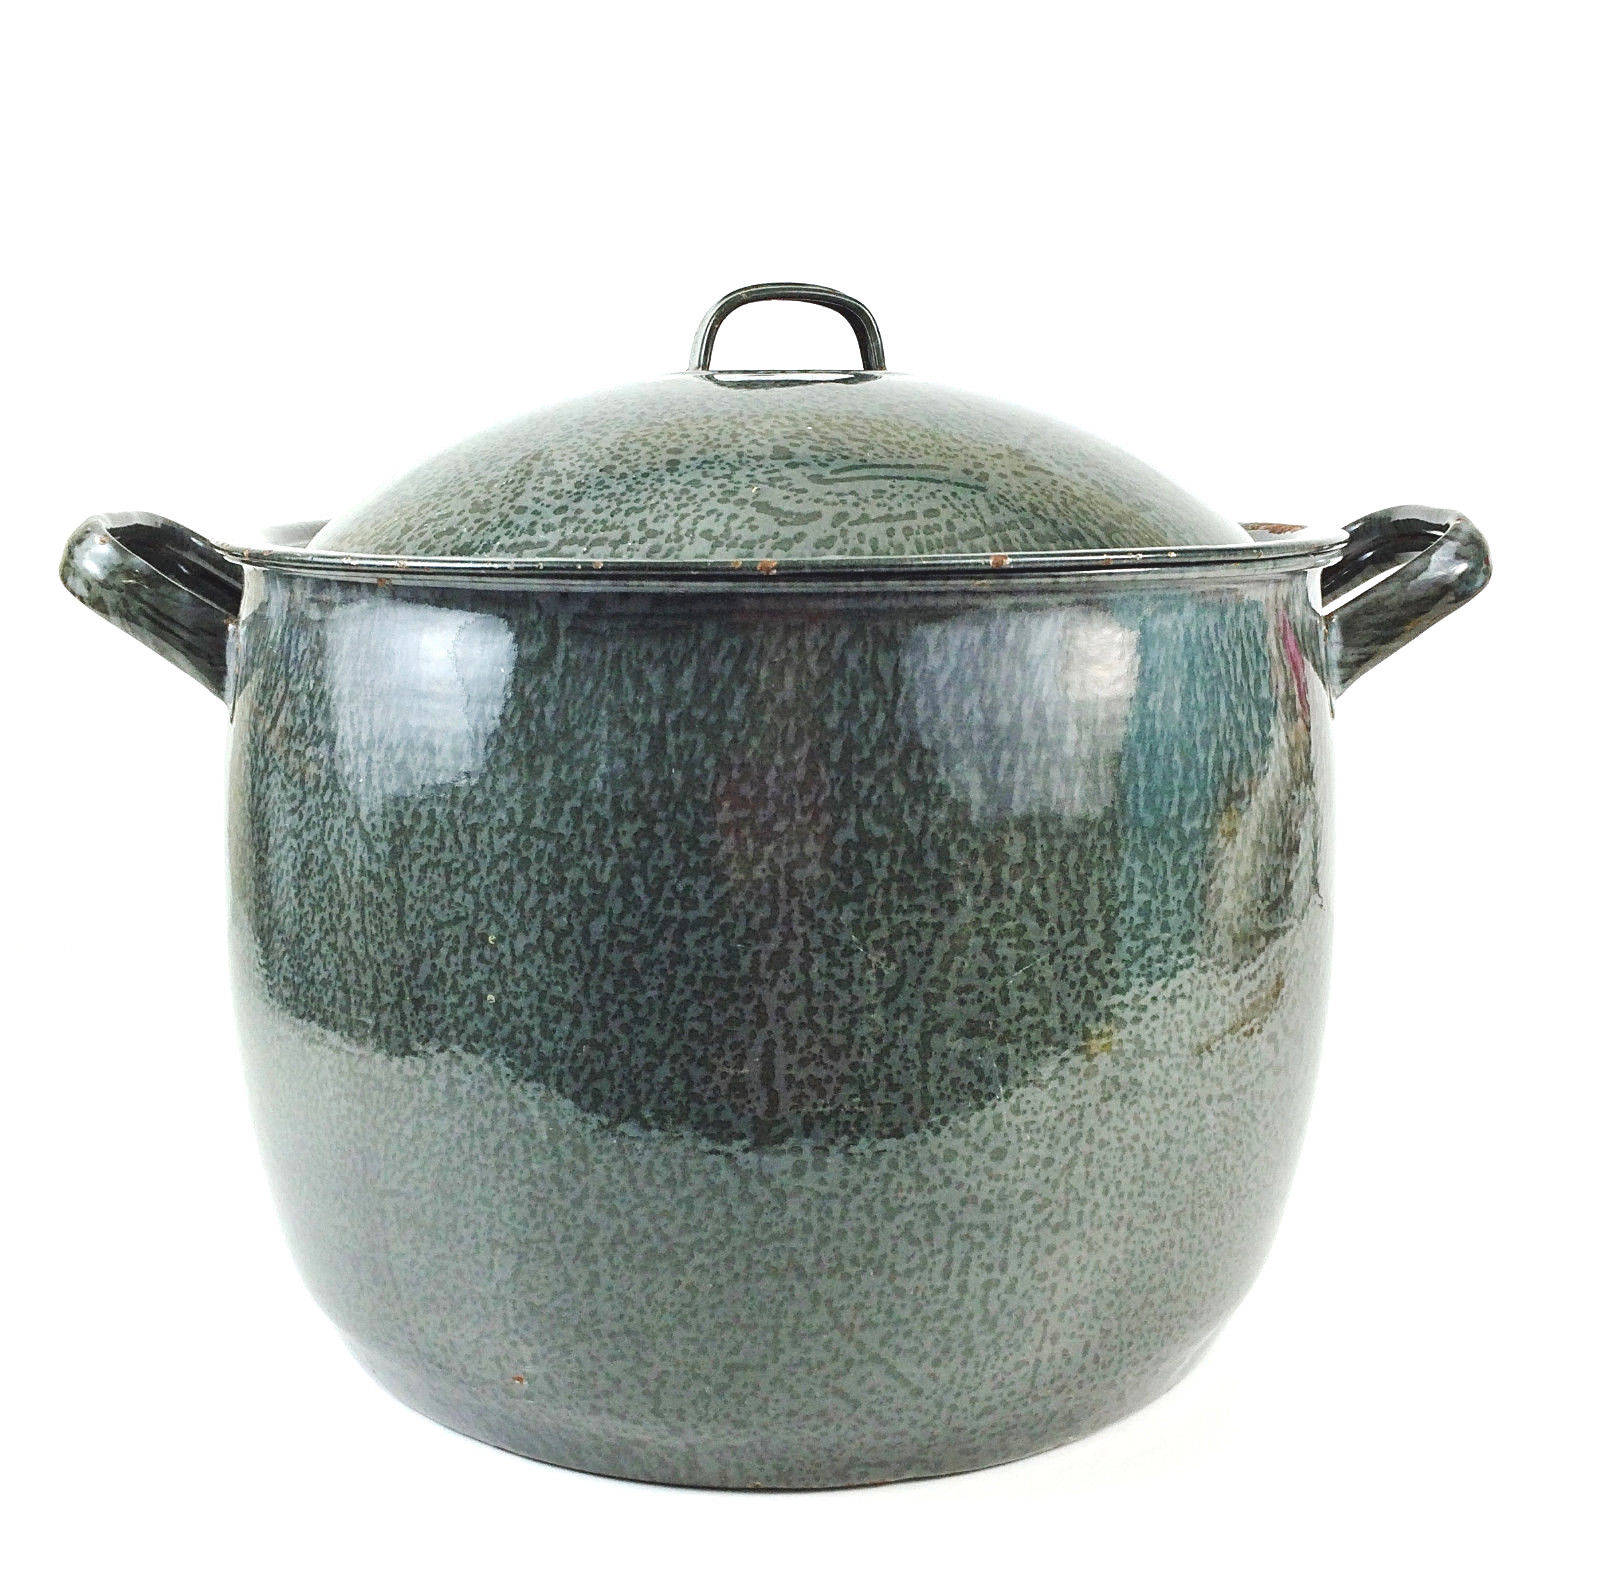 Vintage Gray Graniteware Stockpot With Strainer and Lid, Gray and